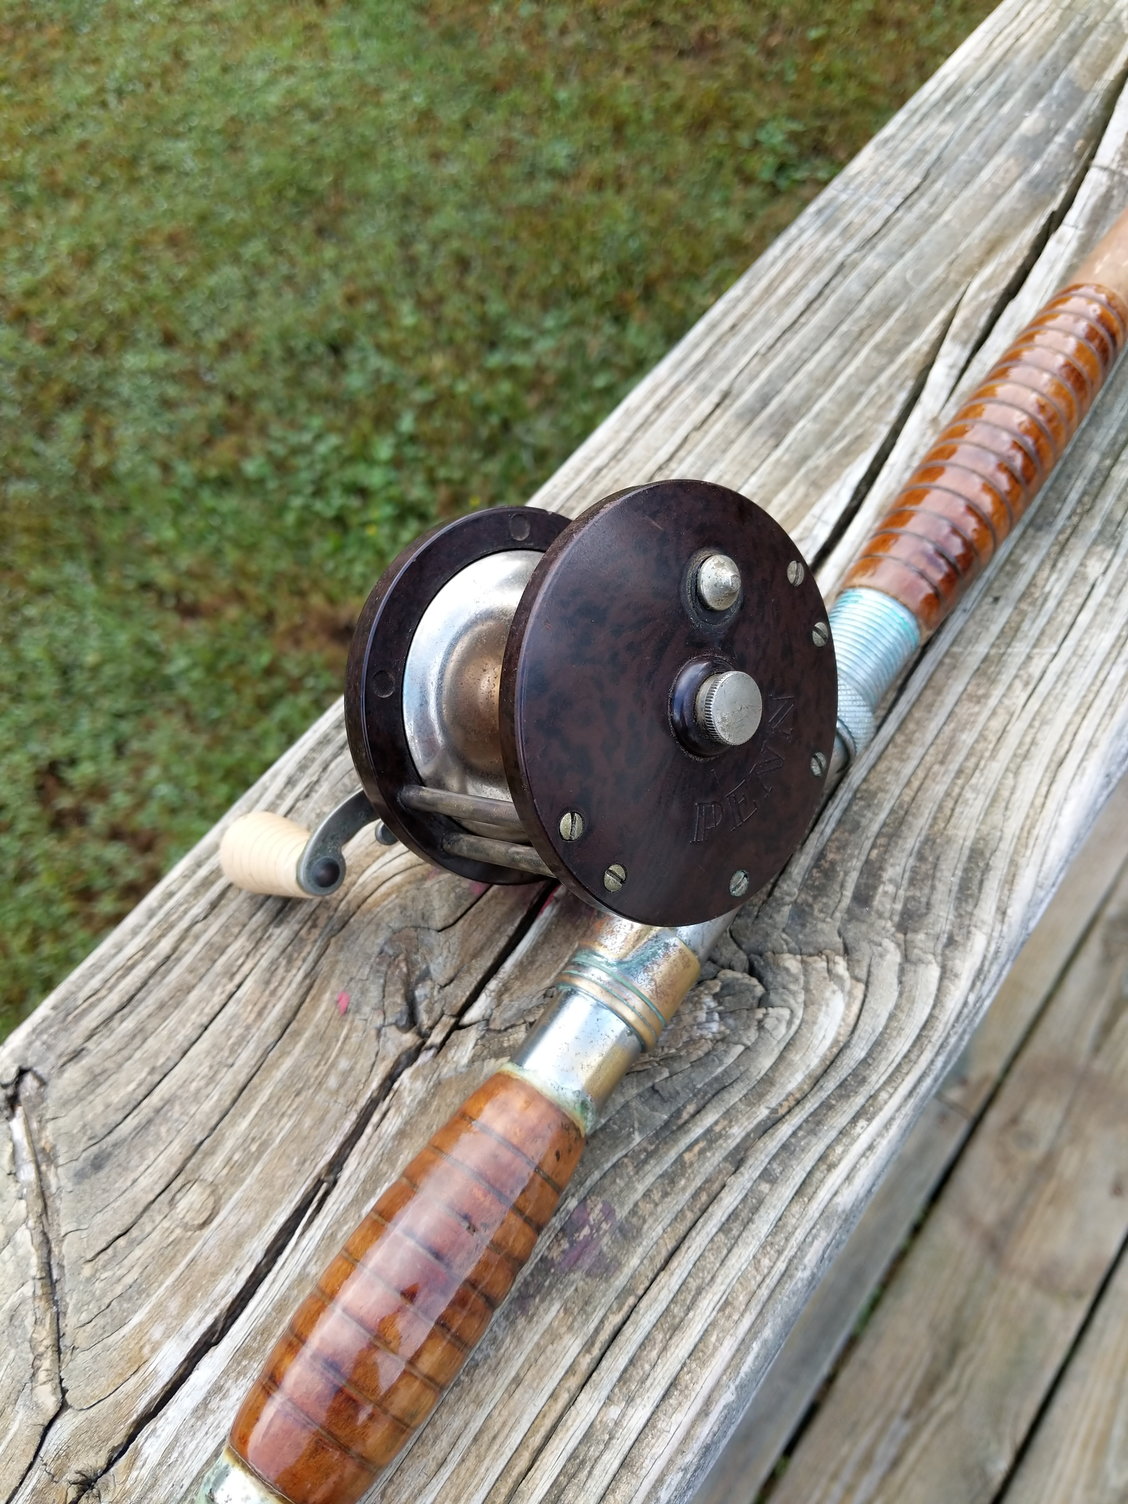 Help identify vintage fishing rod - Page 2 - The Hull Truth - Boating and  Fishing Forum